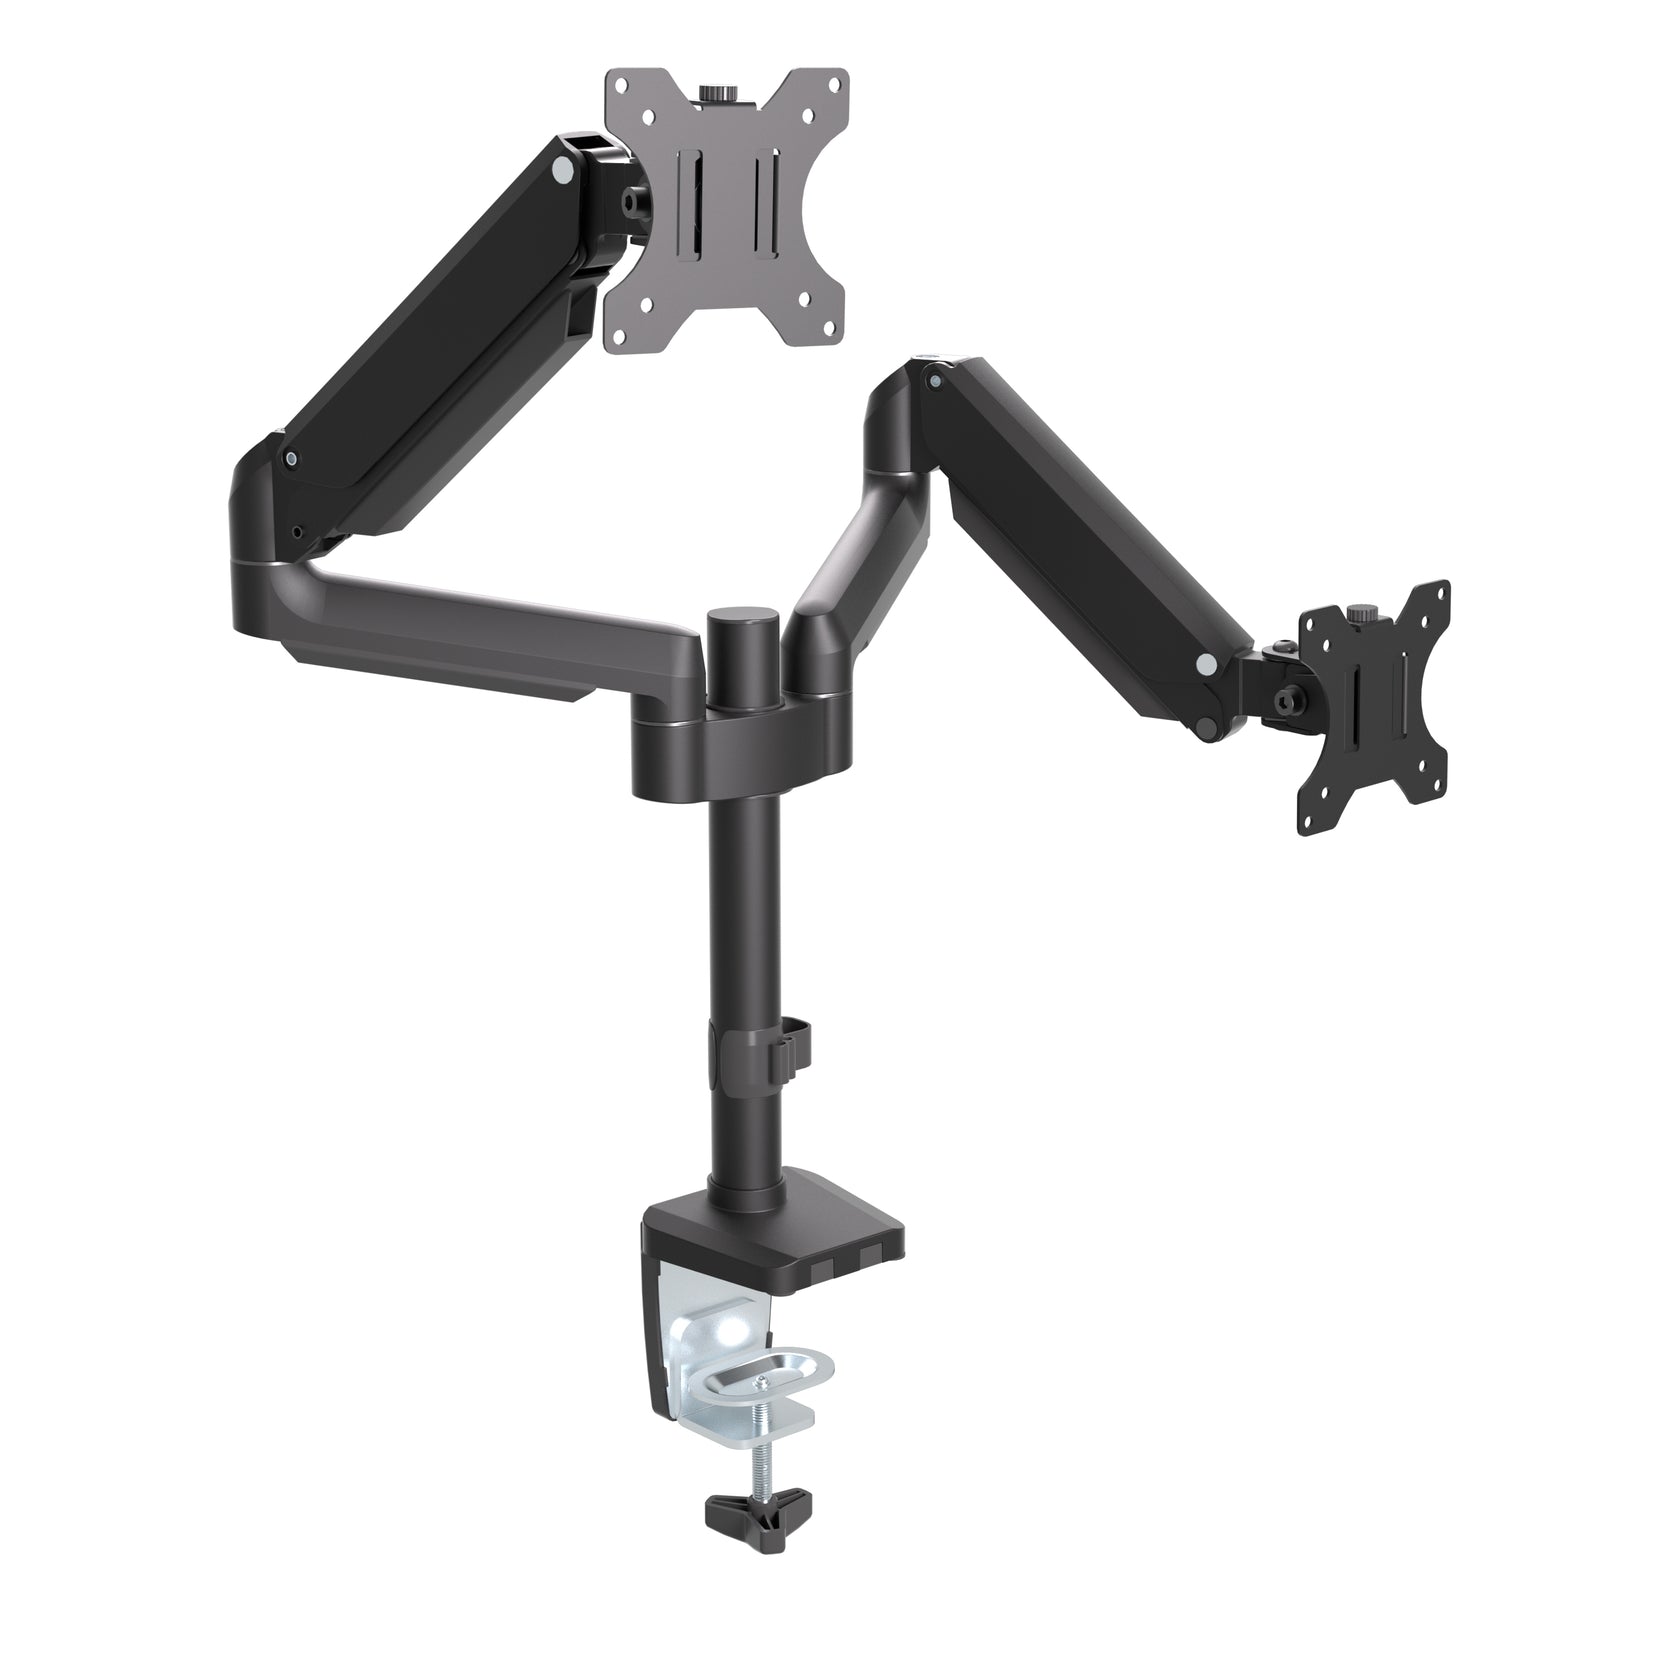 ProMounts PPMA2S Landscape to Portrait Double Monitor Arms for 13" to 32" Screens